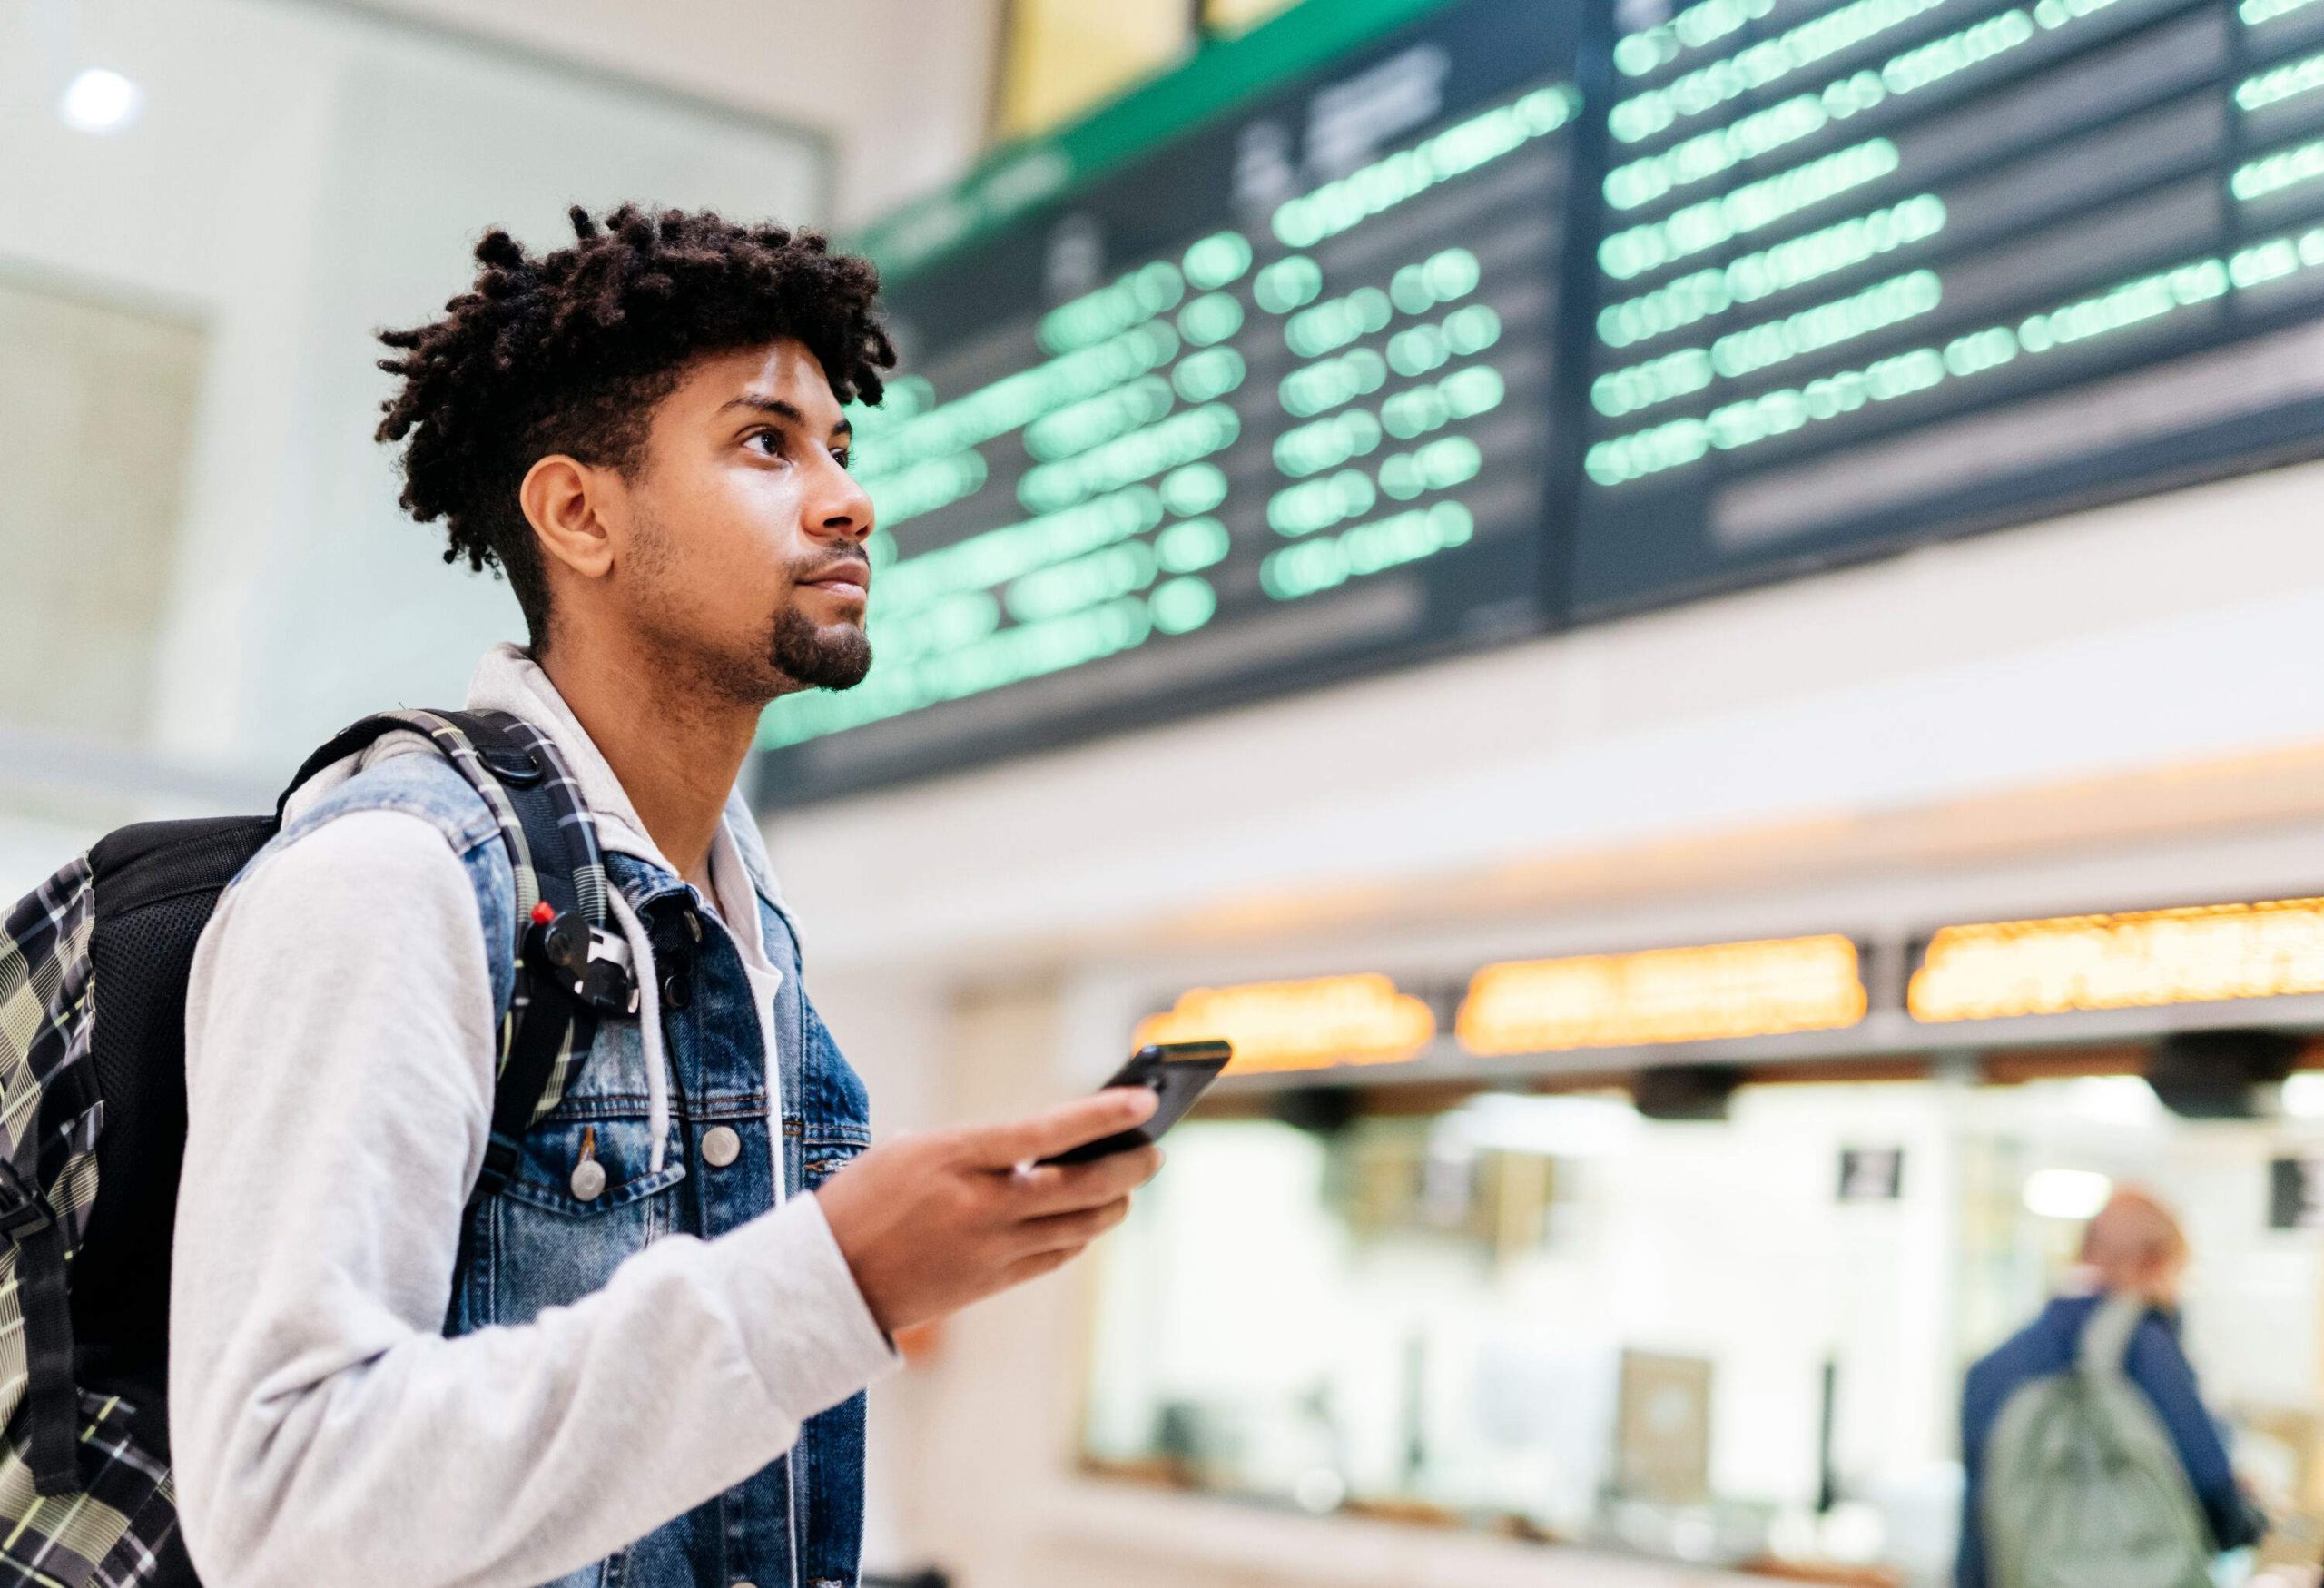 A young man holding hisA man wearing a denim vest and backpack stands in an airport, holding a mobile phone, and intently studying the departures board. smartphone checks the flight schedules on the airport's departure board.